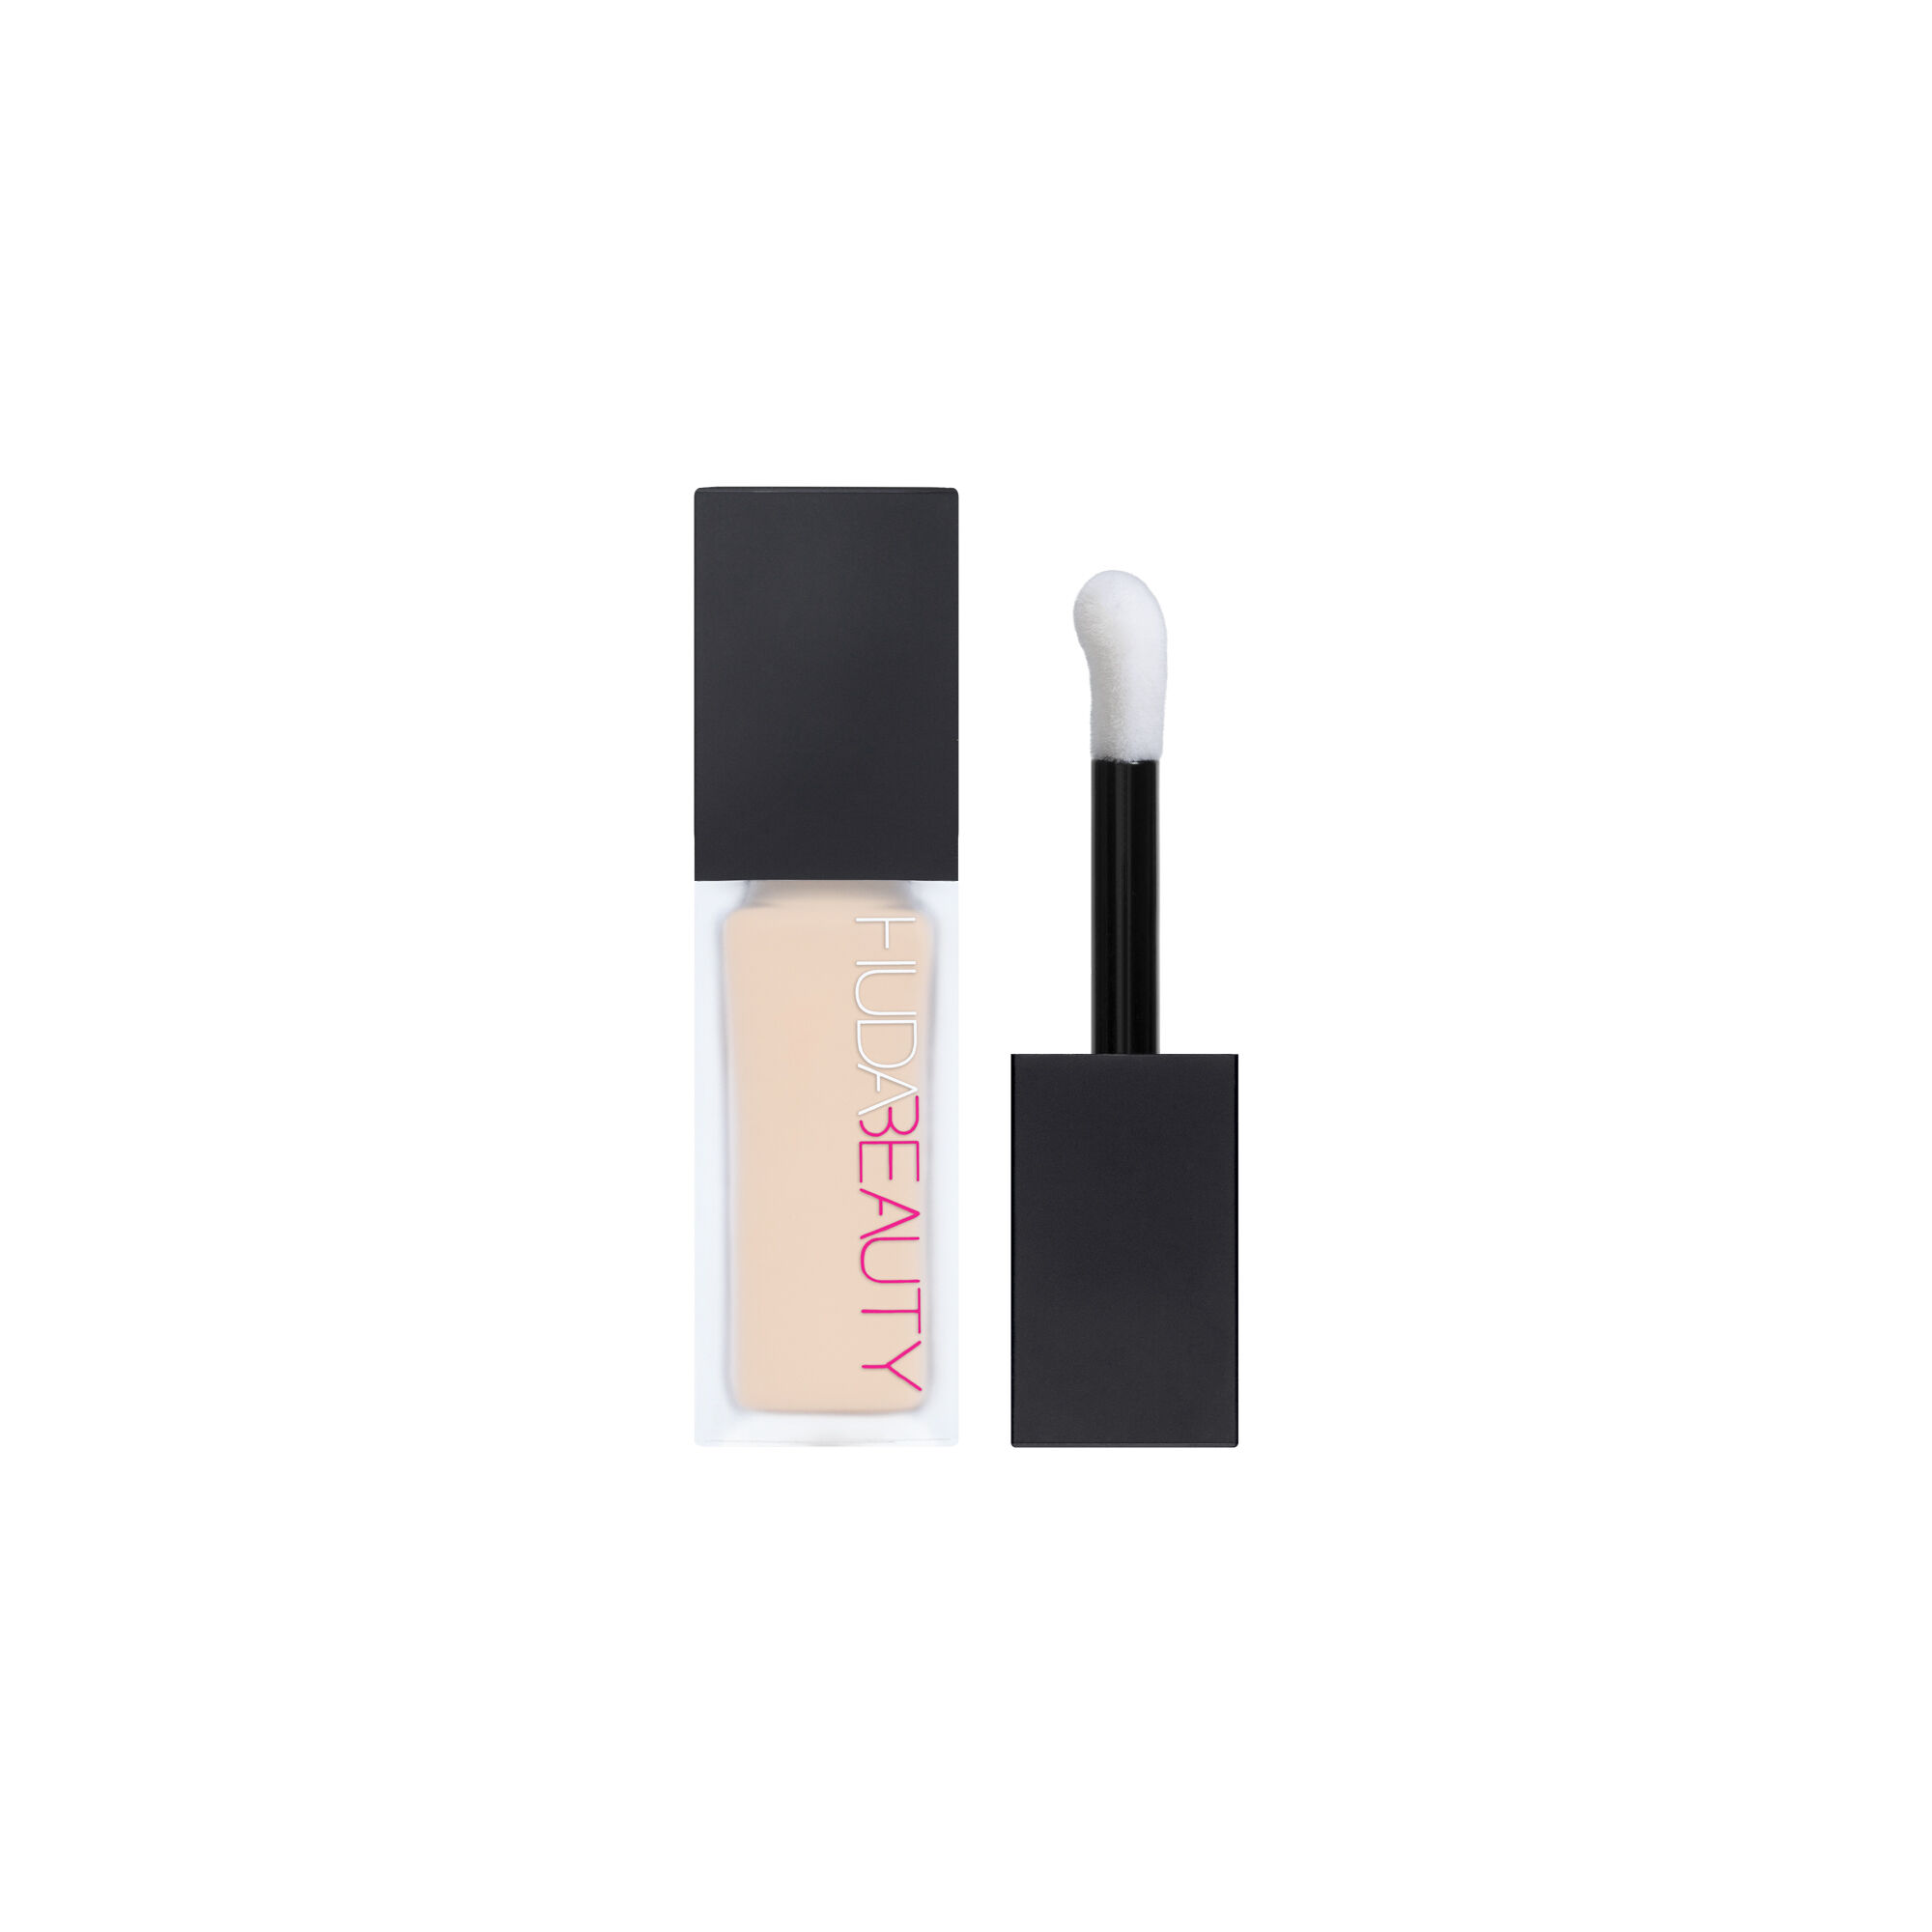 Huda Beauty Faux Filter Concealer Royal Icing 1.1 In Royal Icing 1.1n